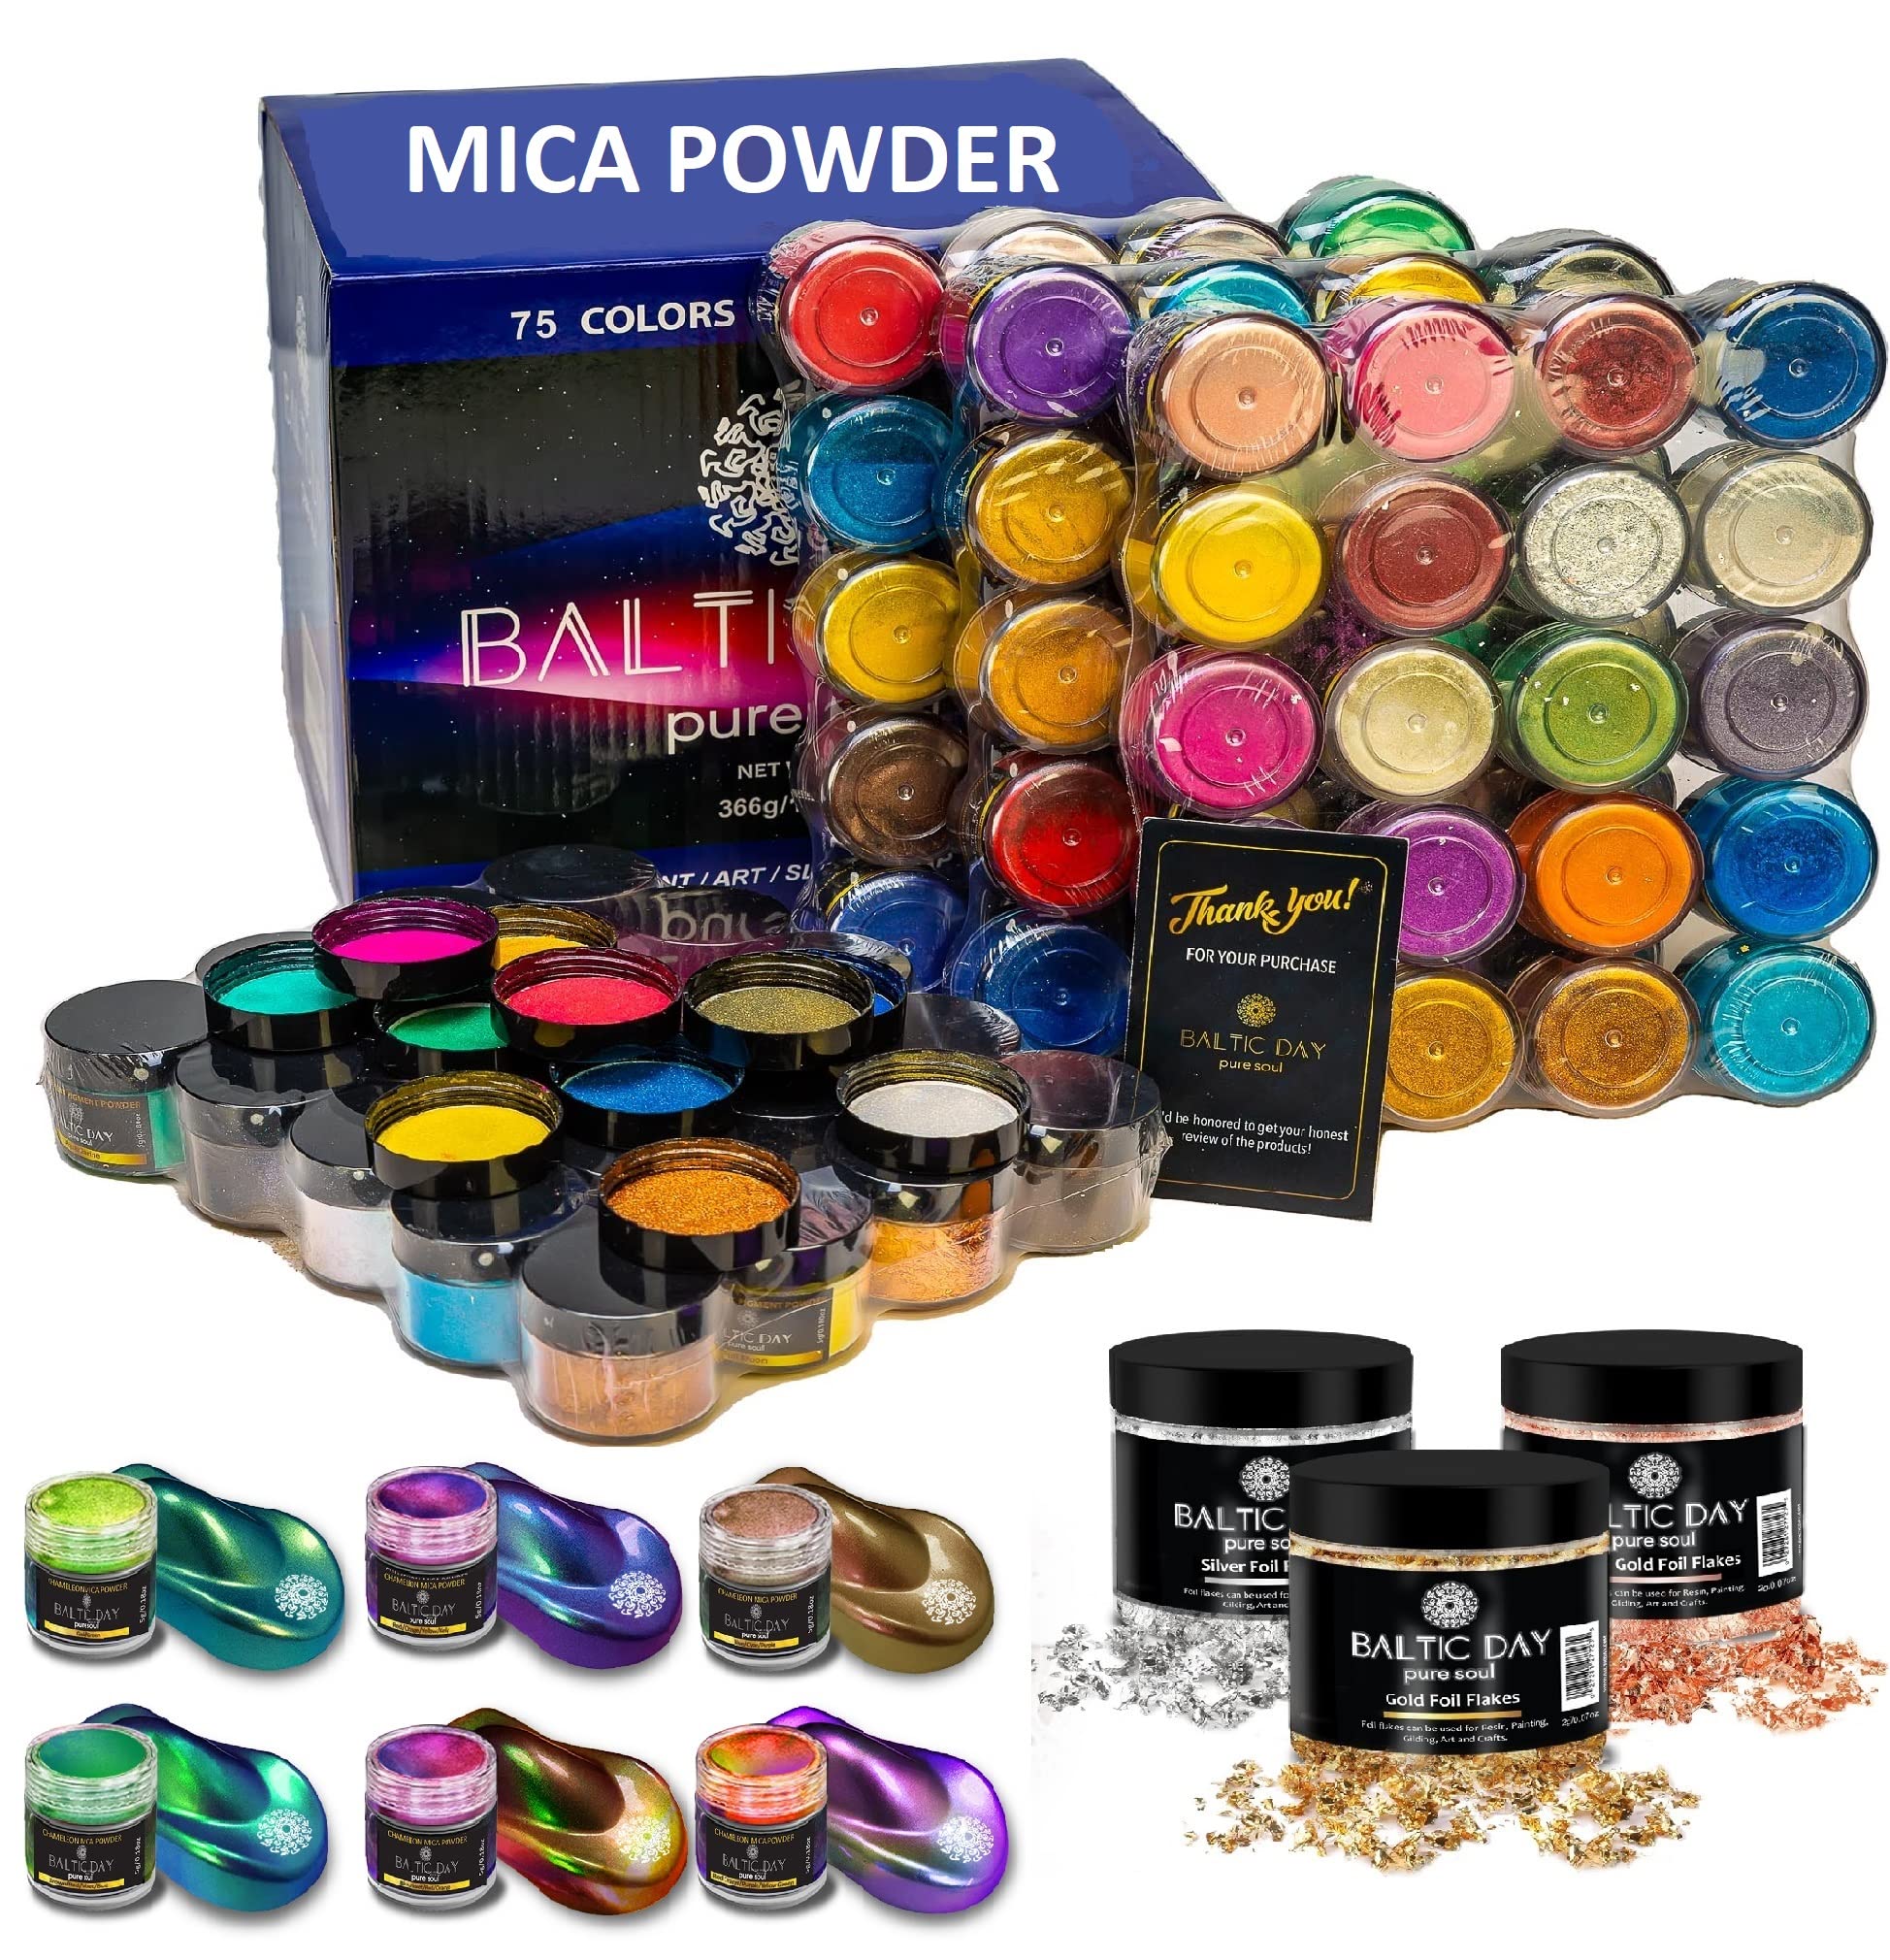 Baltic Day - Mica Powder for Epoxy Resin, 75 Color Bottles Set - Chameleon Mica  Powder - Epoxy Resin Color Pigment - Mica Powder for Soap Making, Candles, Bath  Bombs, Resin Dye